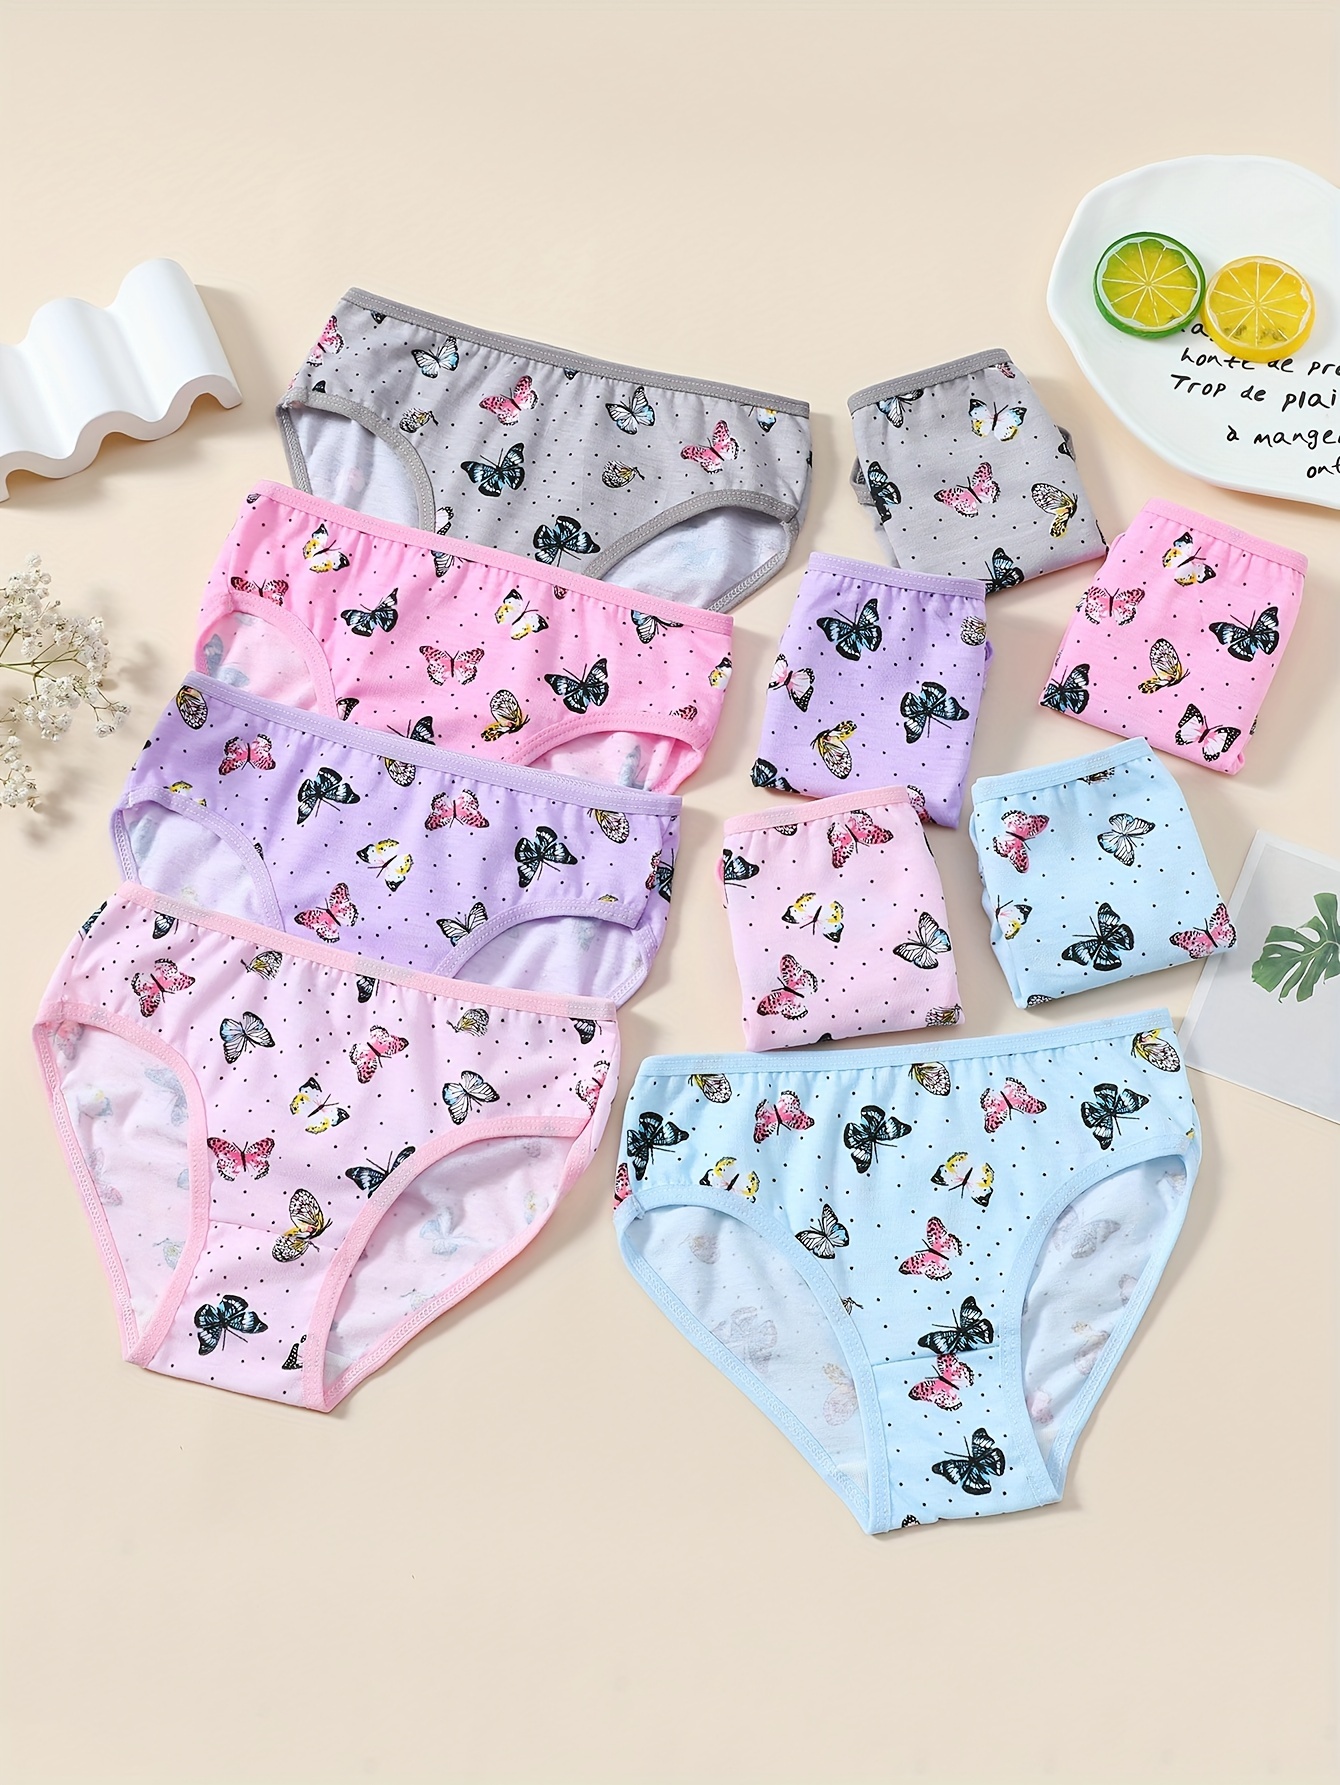 Kids Soft Cotton Bloomer Briefs/Panties for Girls Innerwear for Kids Pack  of 5